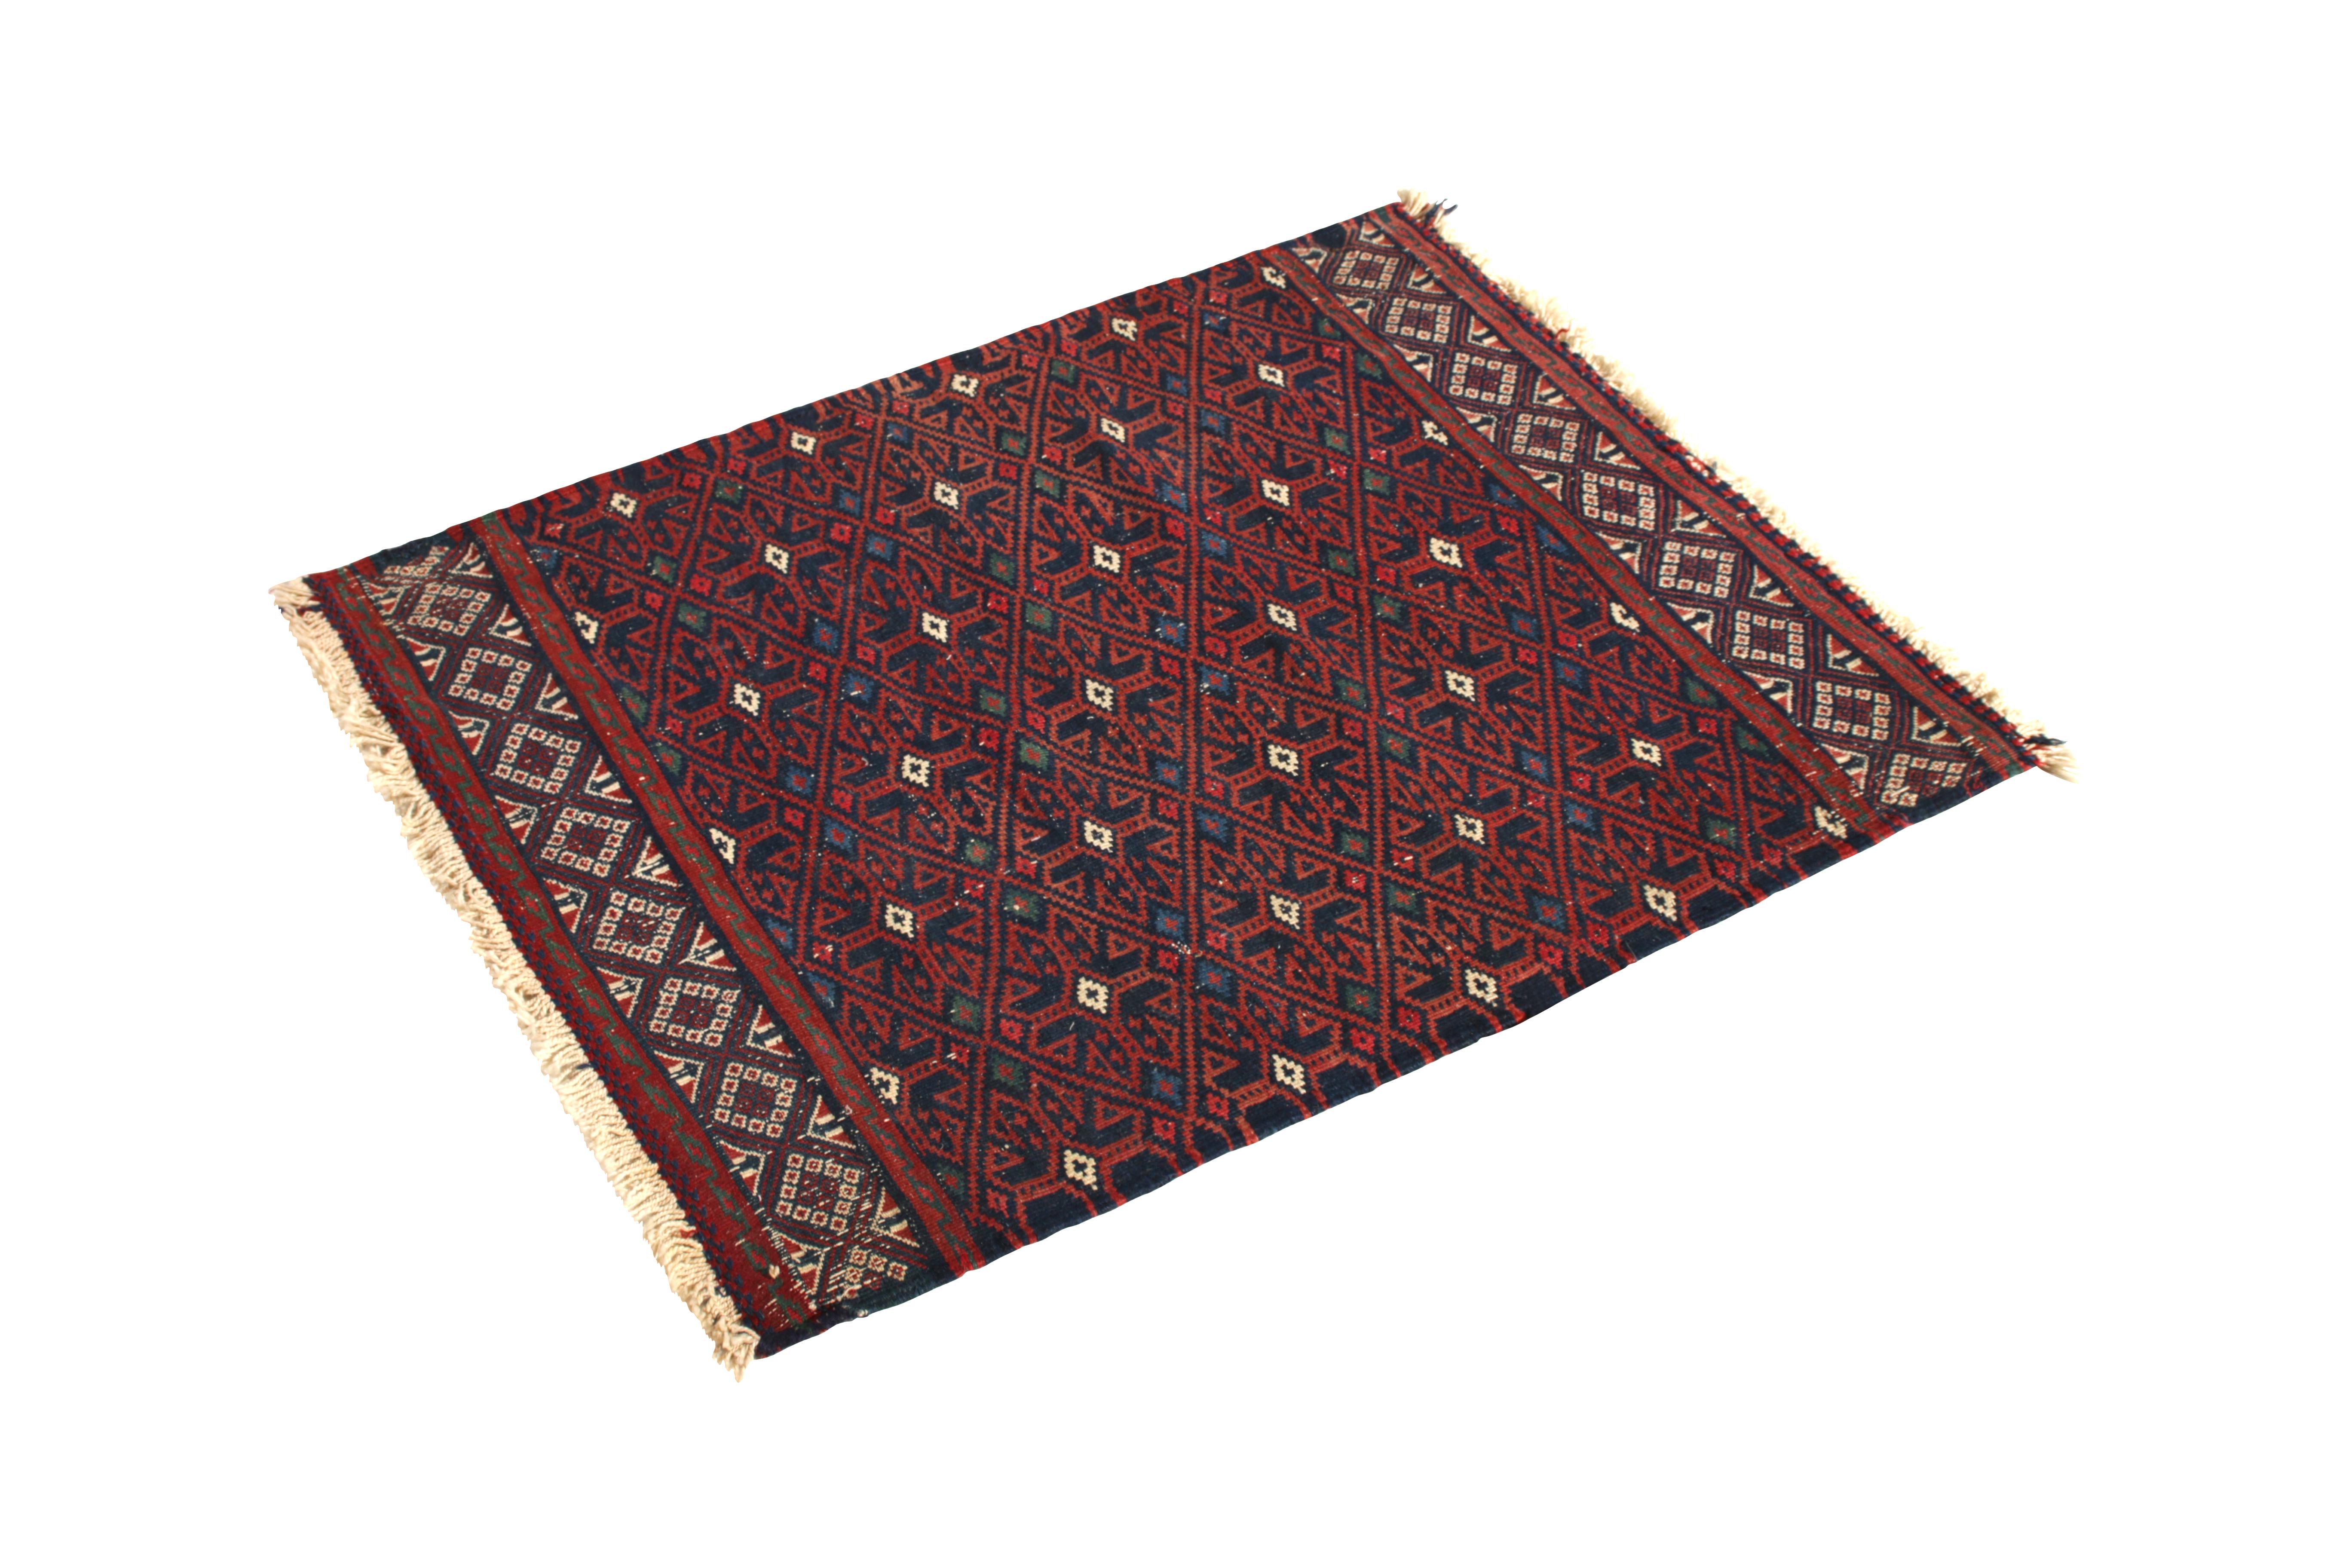 Handwoven in Turkey originating between 1950-1960, this vintage midcentury Kilim rug enjoys a Soumak style weave thicker and more durable than typical Kilim, a fine complement to the Classic play of crimson red and blue as well as the crisp white